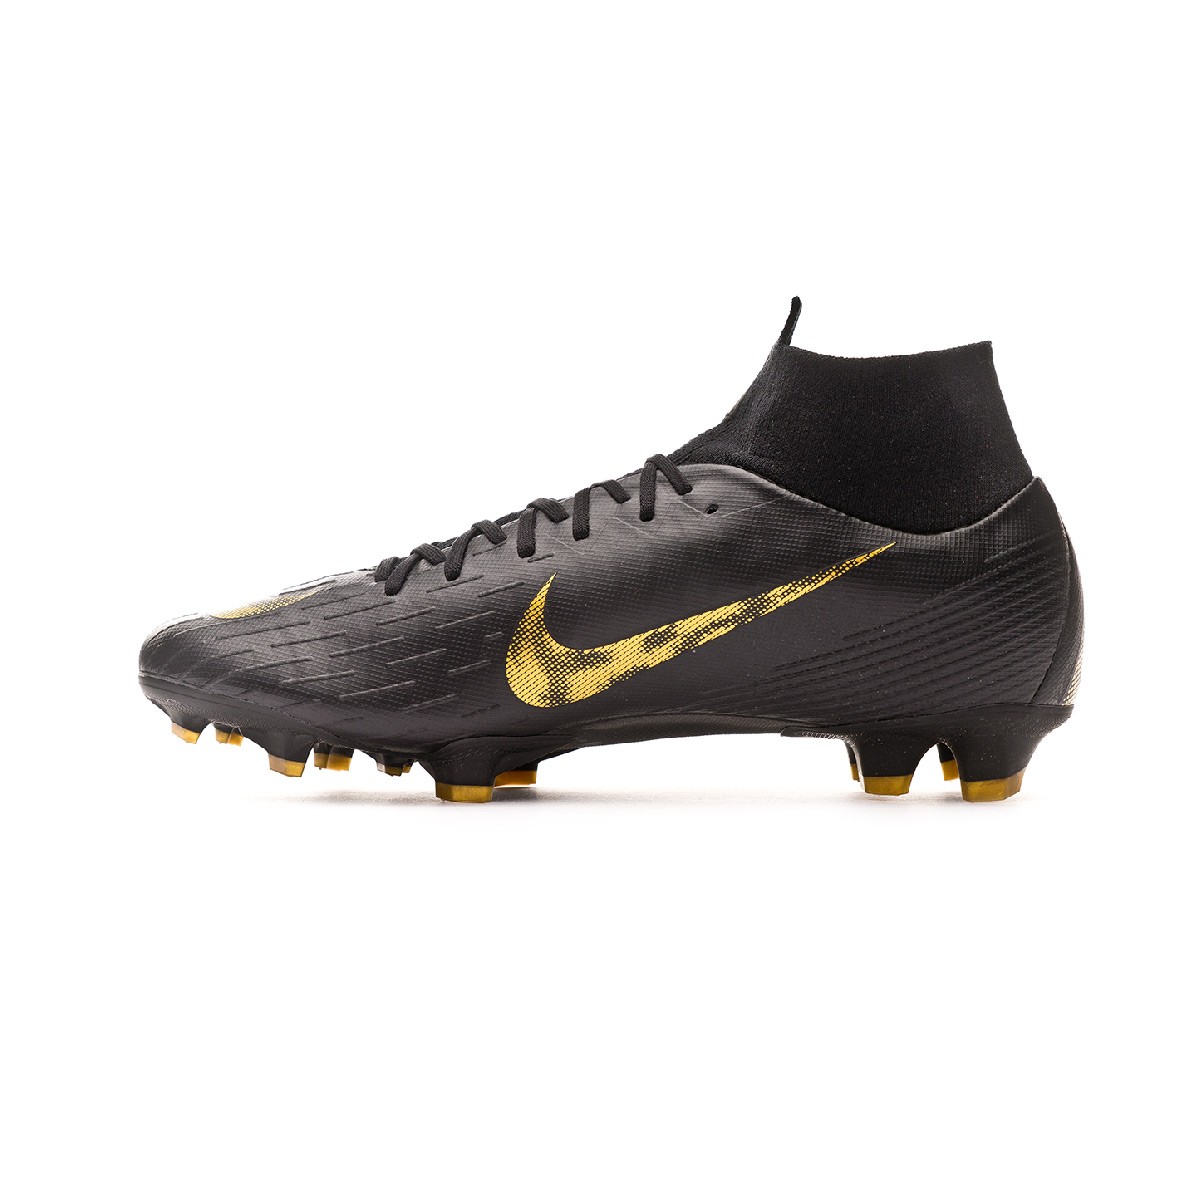 Buy 2 OFF ANY nike mercurial superfly 6 elite fg stealth ops CASE.